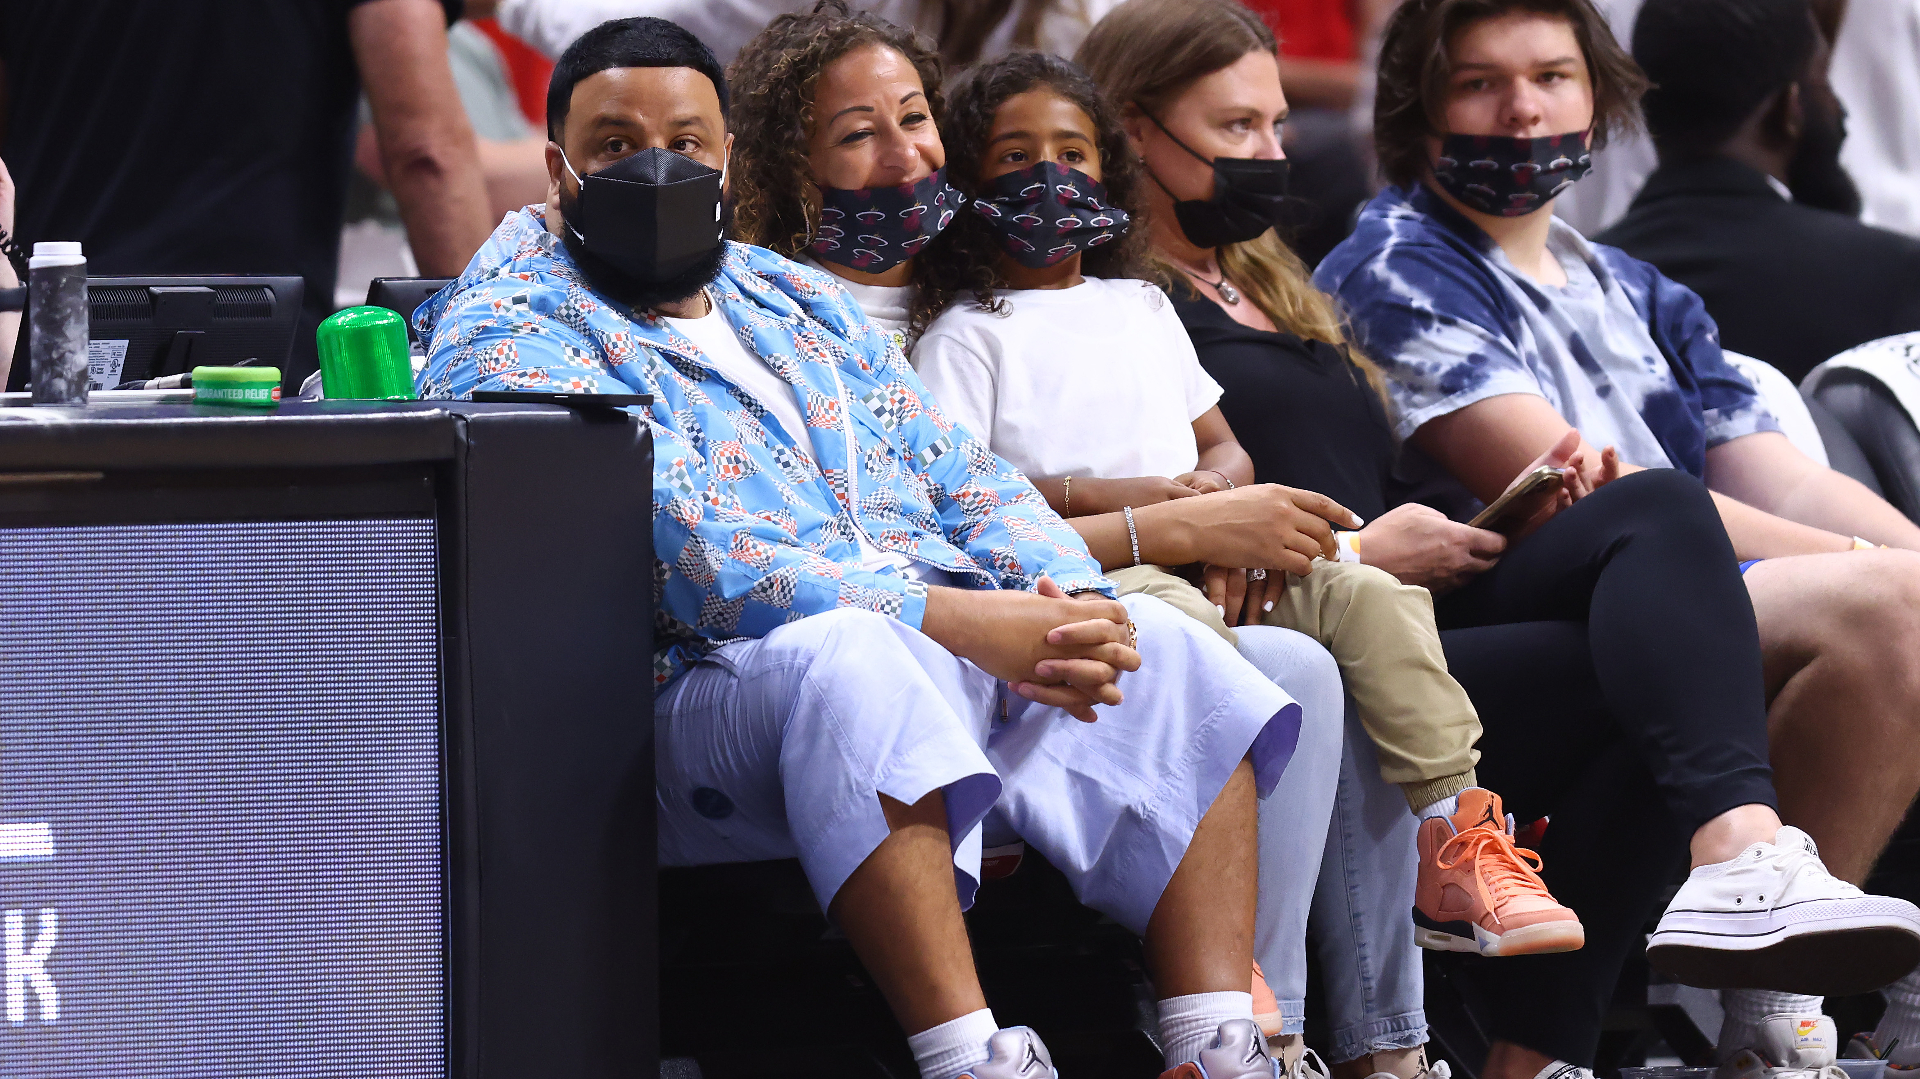 DJ Khaled Sits Courtside in Louis Vuitton x Nike Air Force 1s